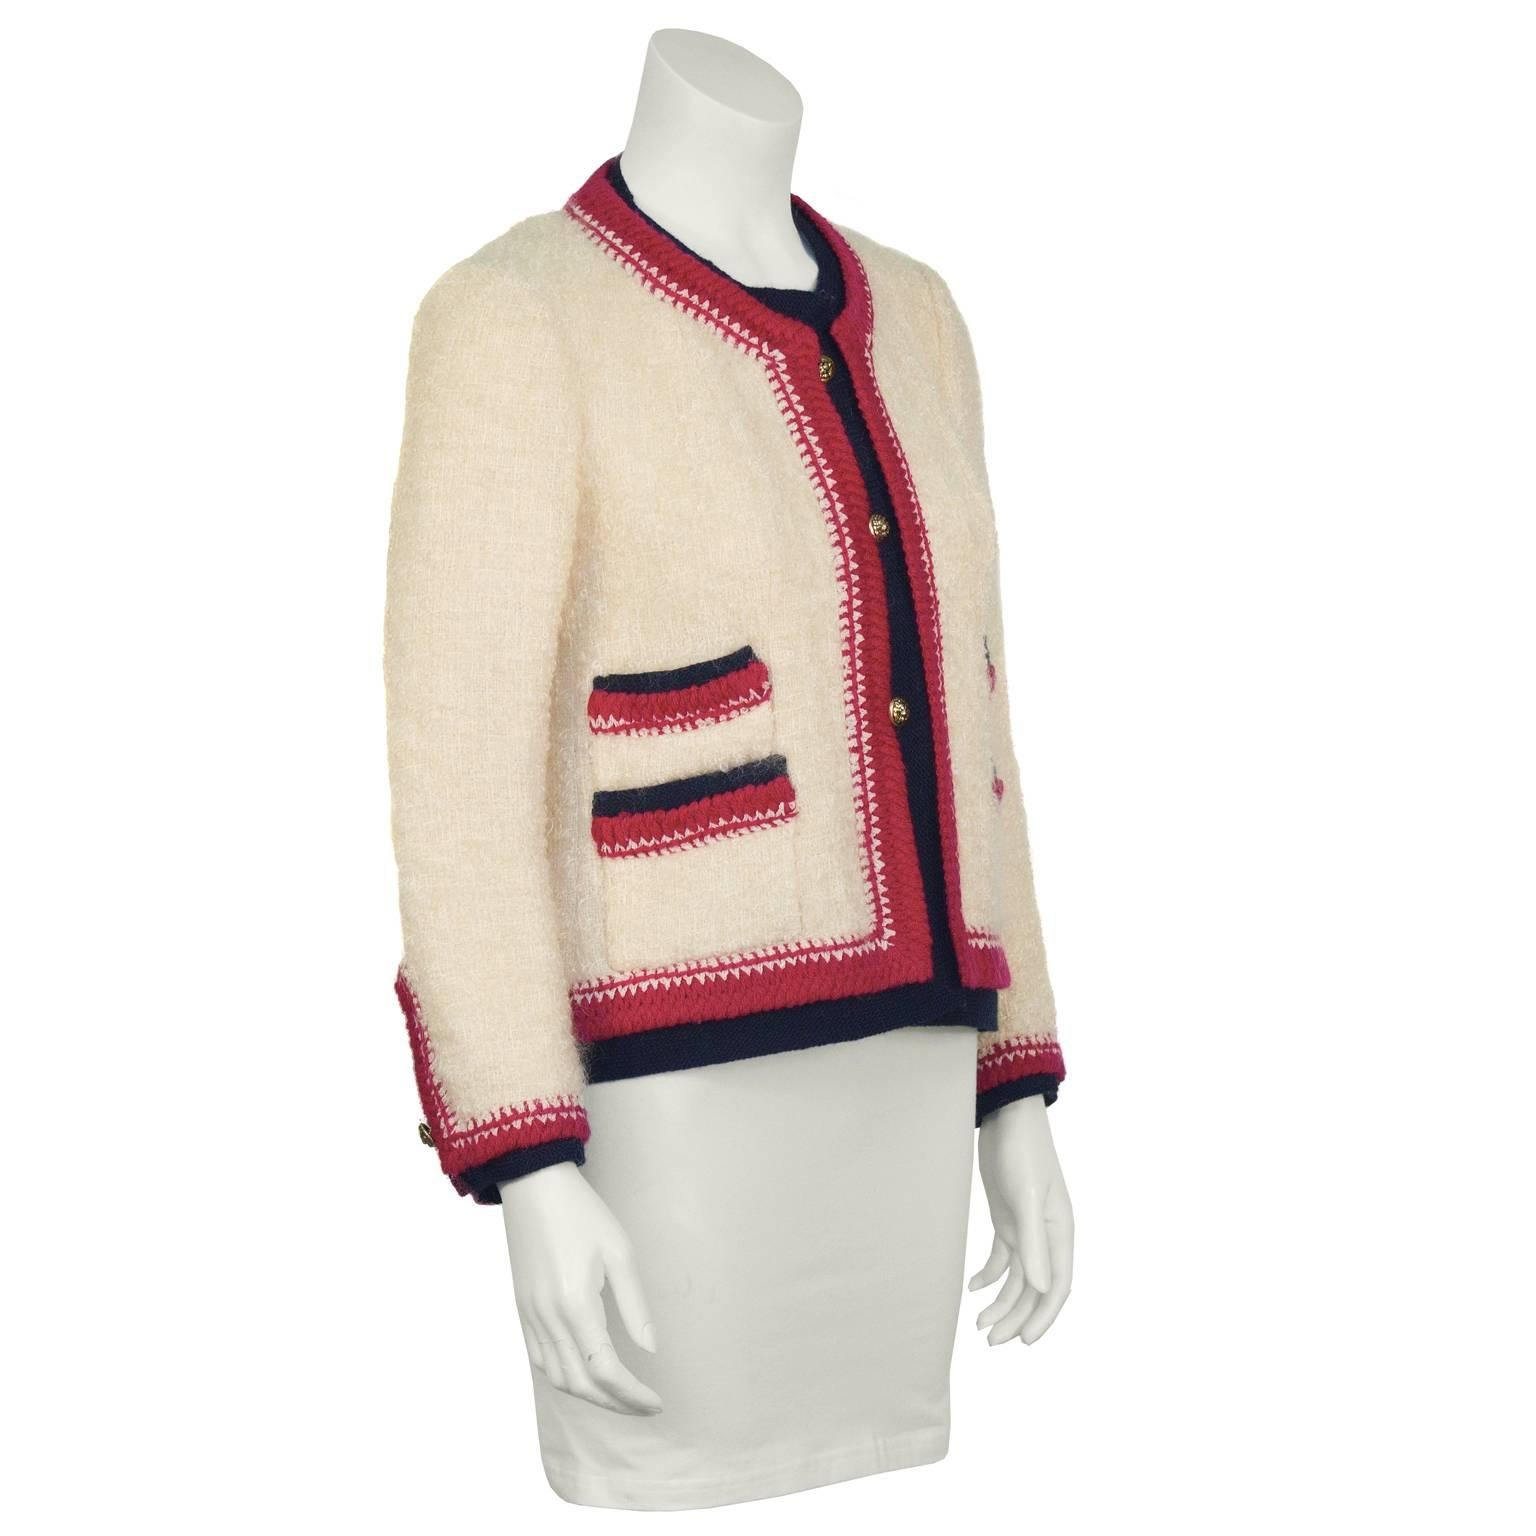 Classic look cream boucle Chanel jacket from the 1980s with magenta and black knit trimming. Feels as comfortable as a cardigan, built like a jacket. Box cut, with two slit pockets on each side and vented cuffs with a button. Fastens up the front